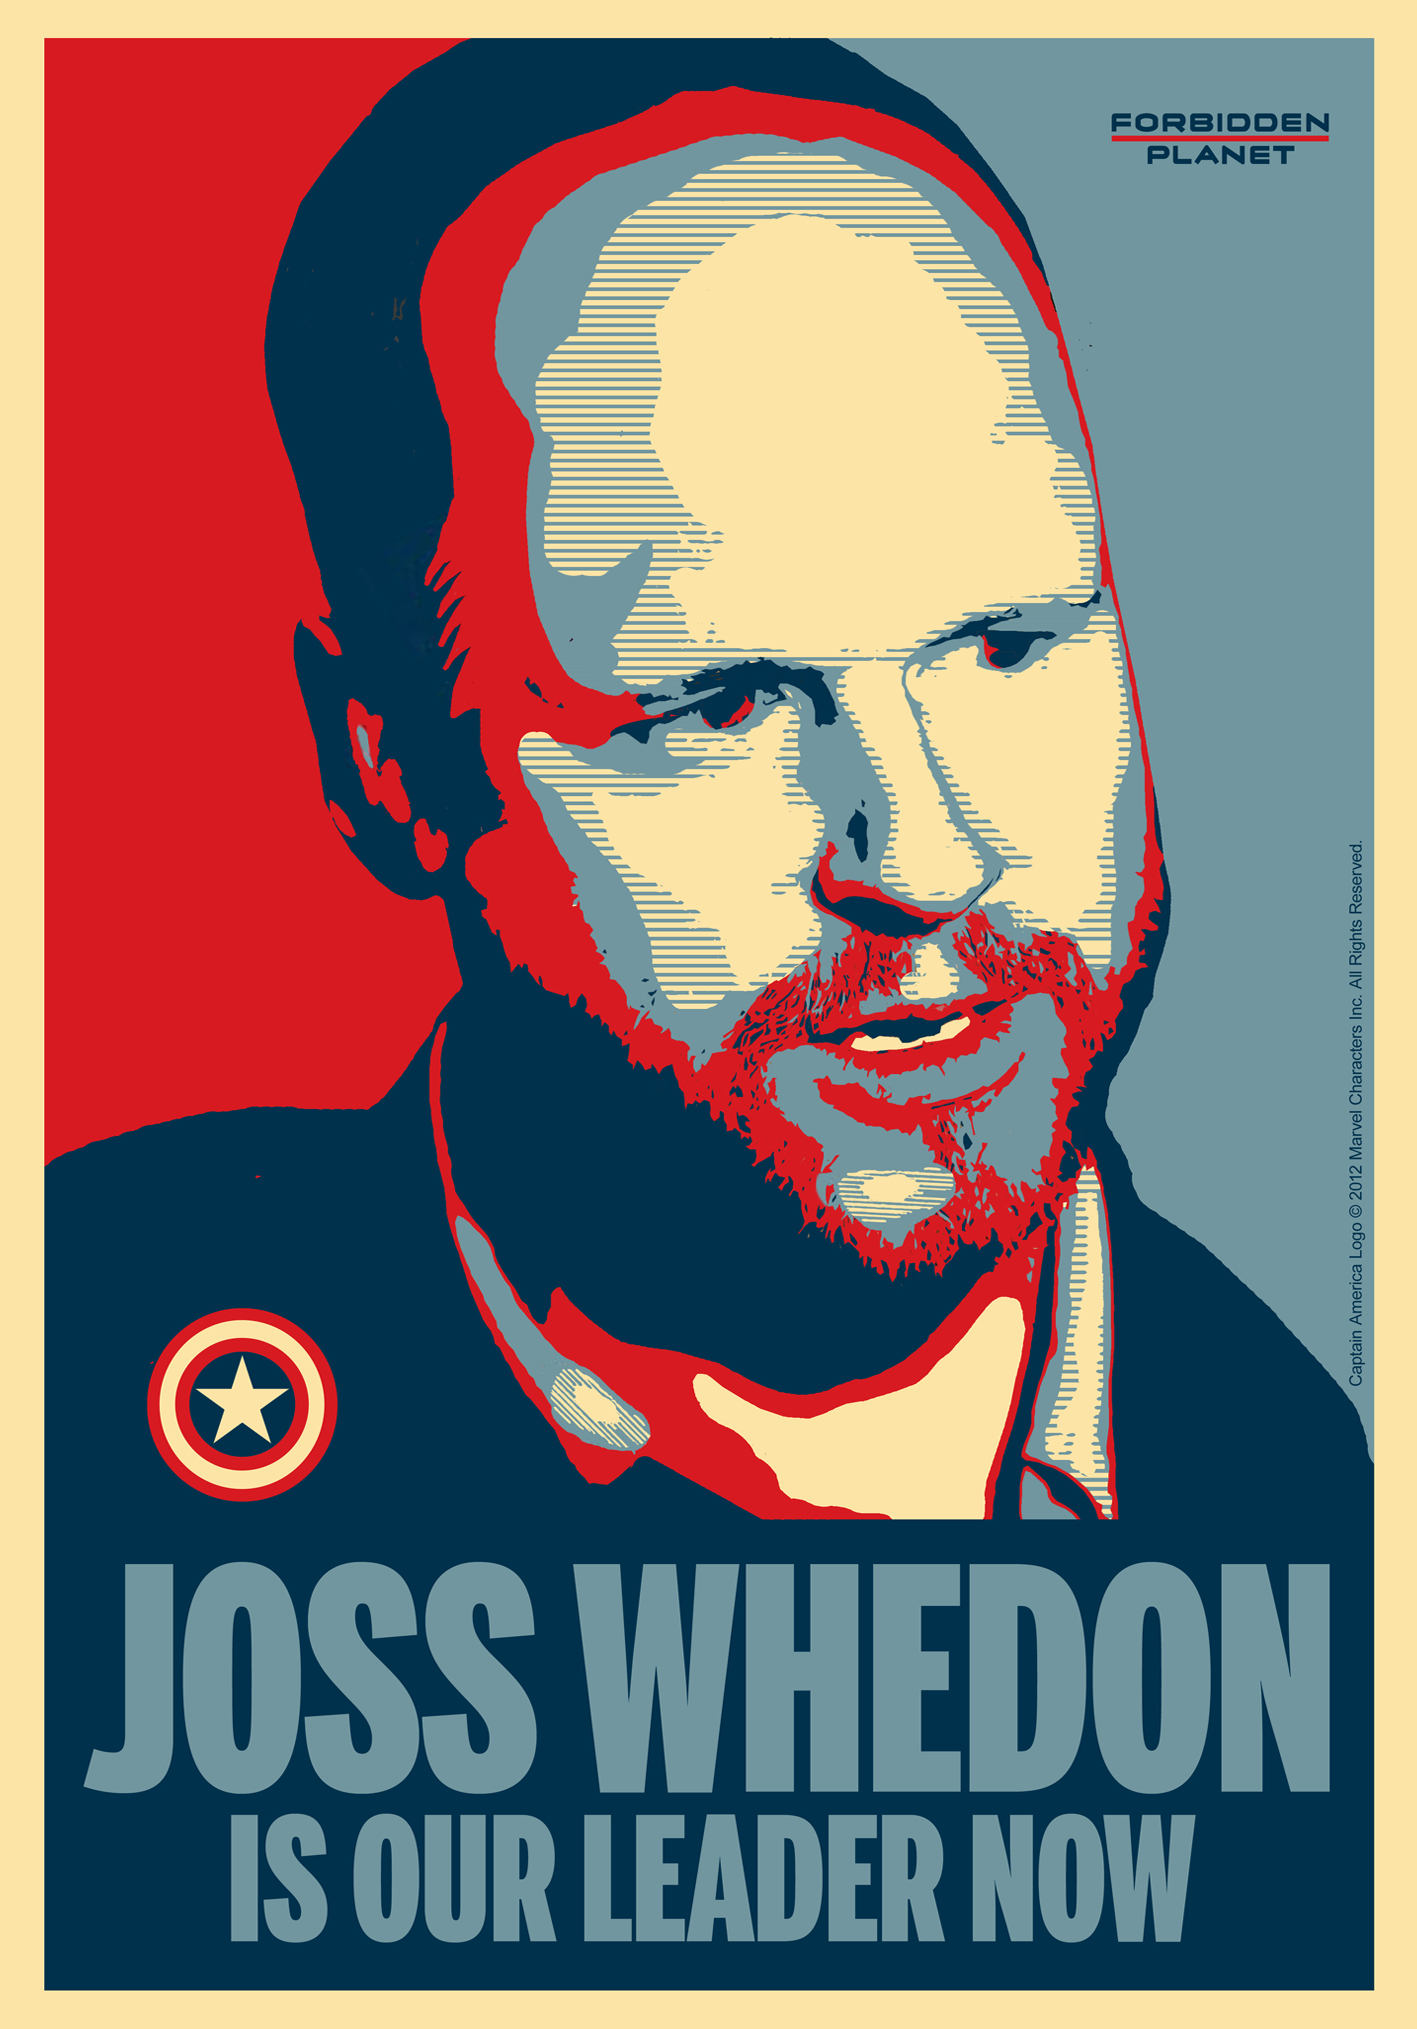 joss-whedon-is-our-leader-now